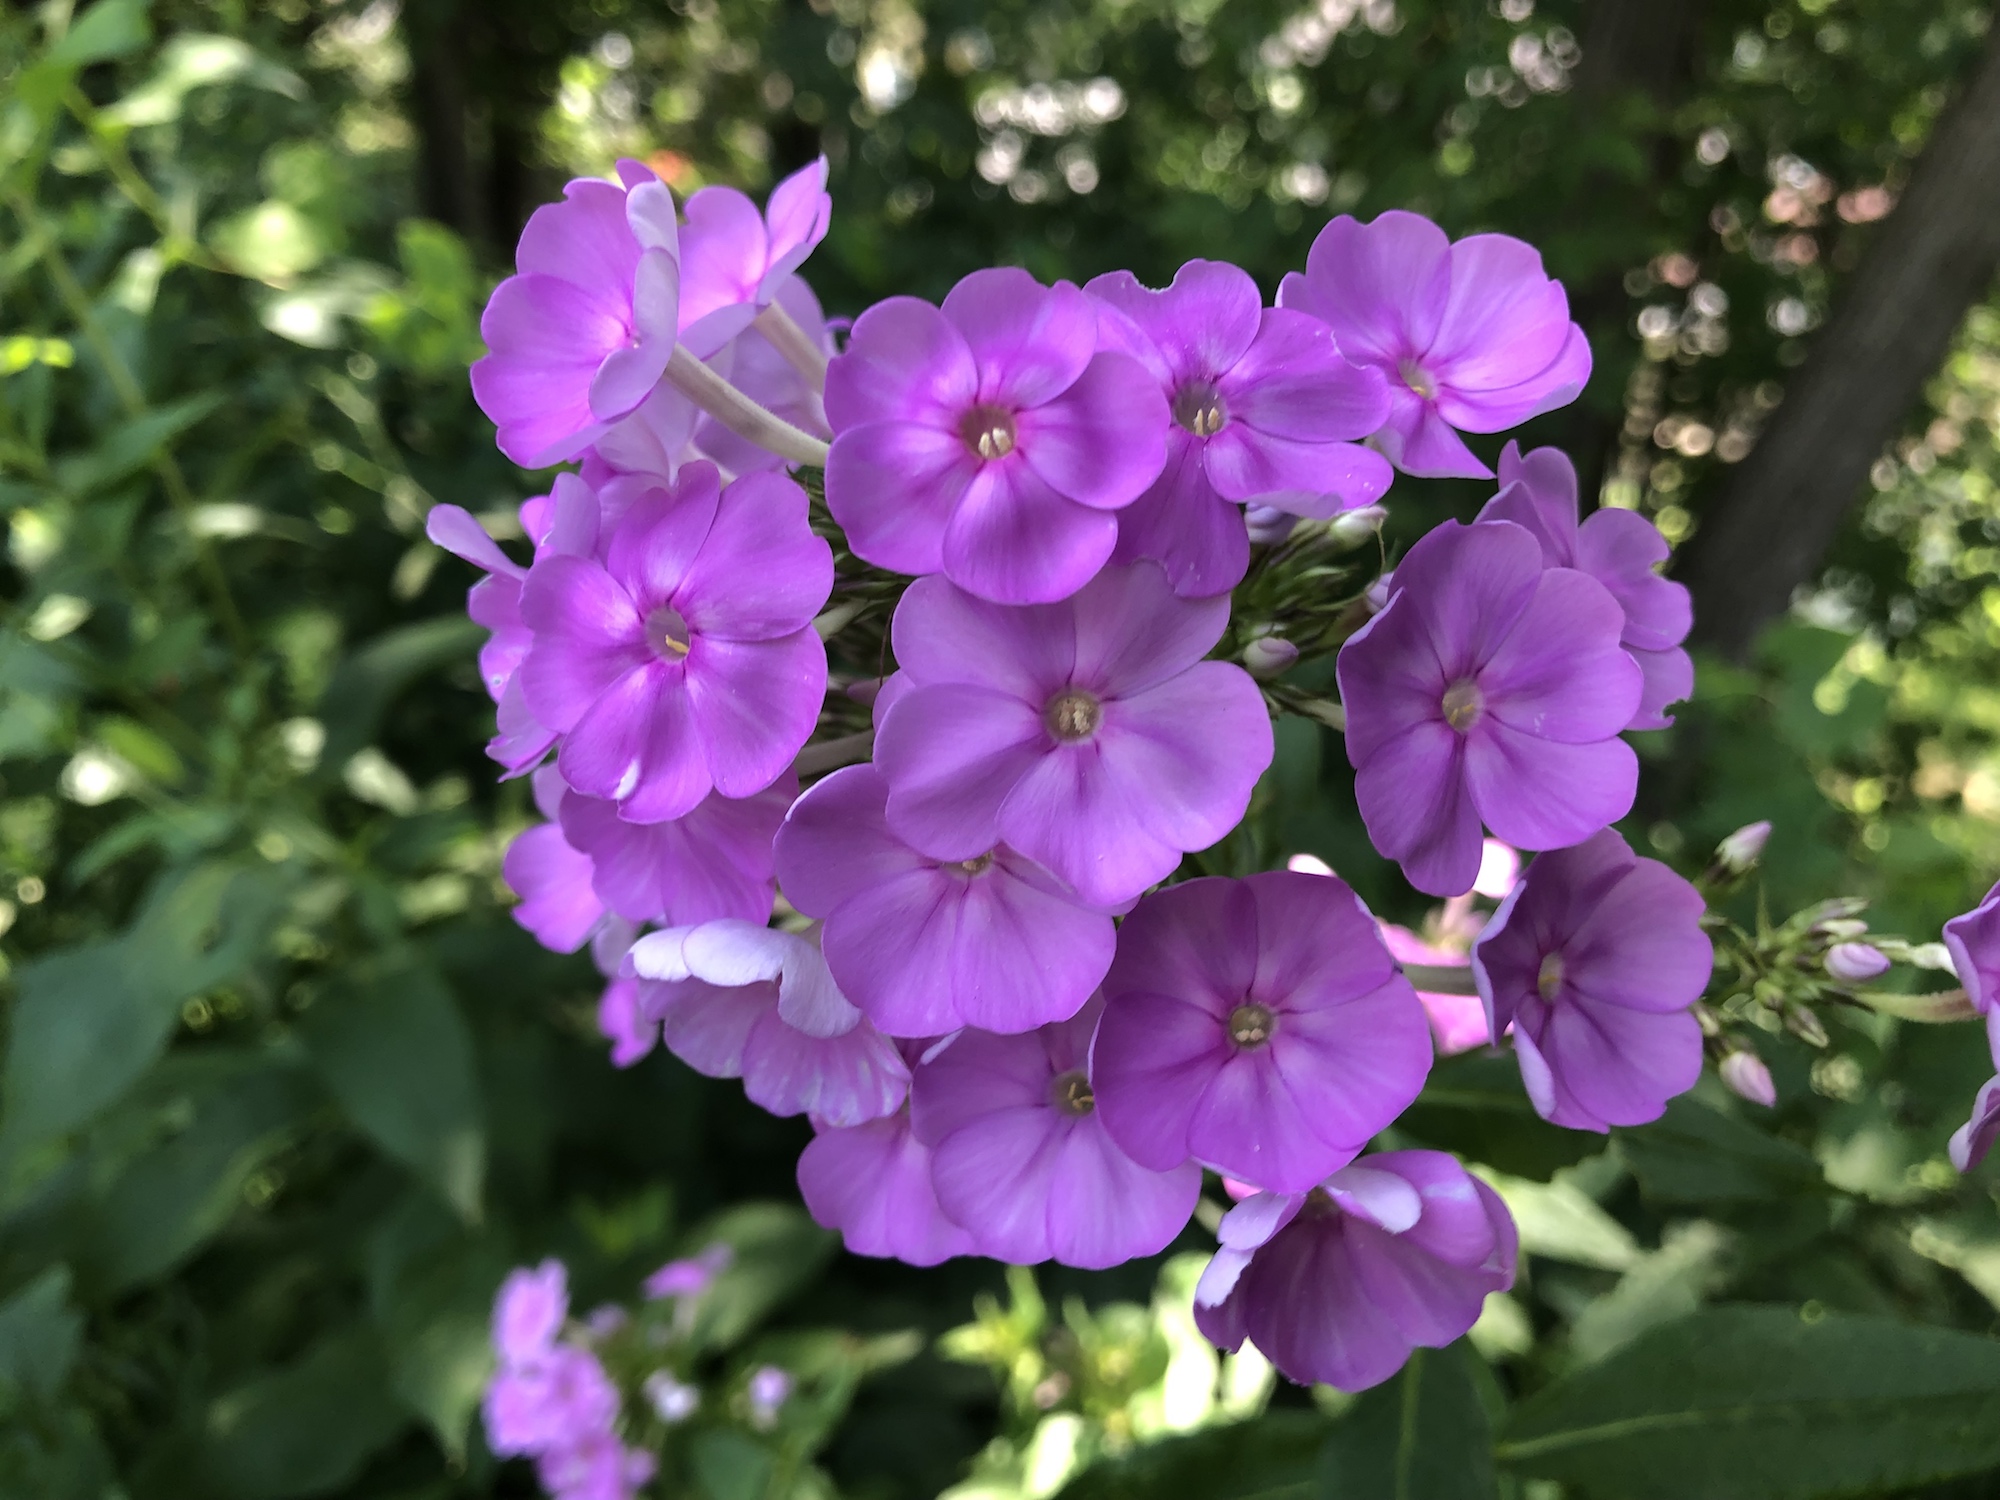 Tall Garden Phlox by Duck Pond on July 8, 2019.